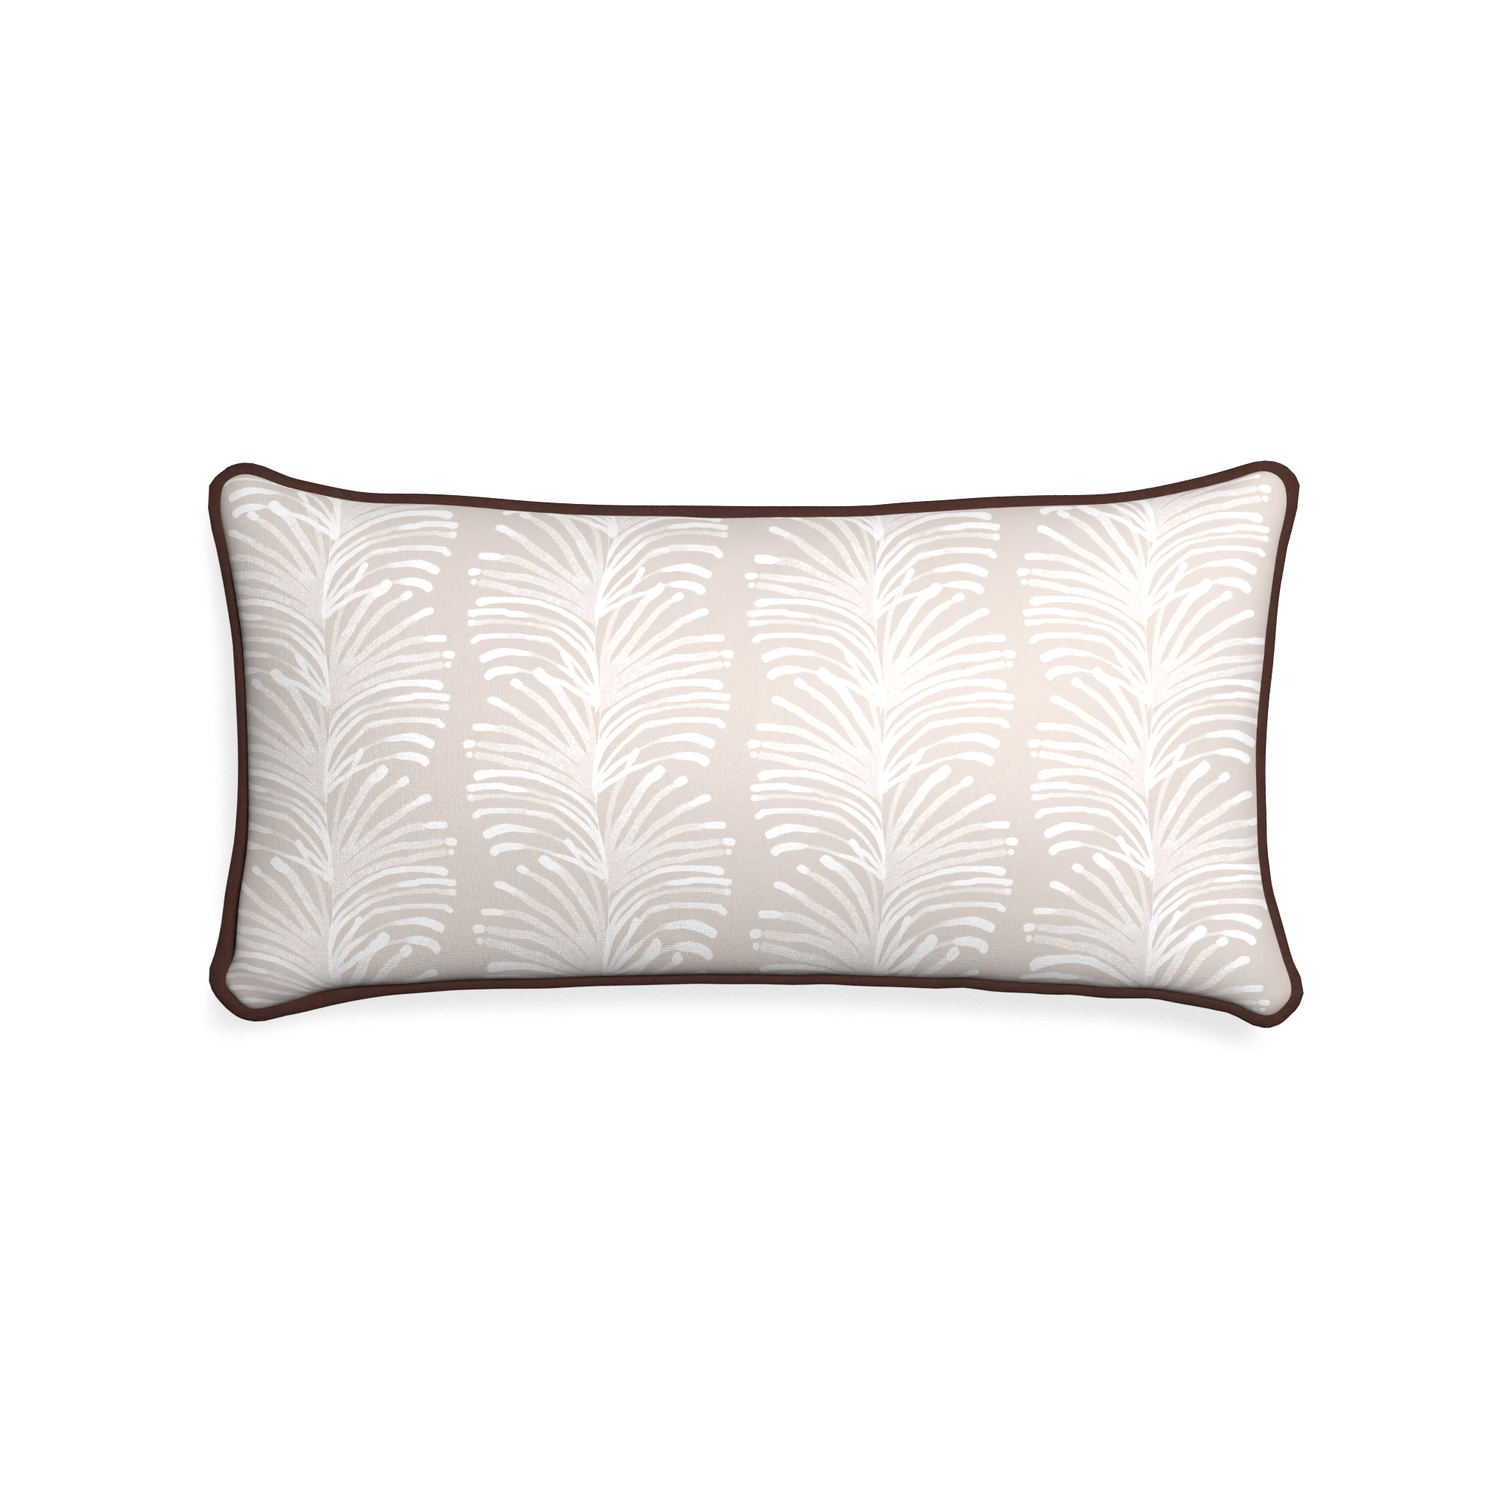 Midi-lumbar emma sand custom sand colored botanical stripepillow with w piping on white background